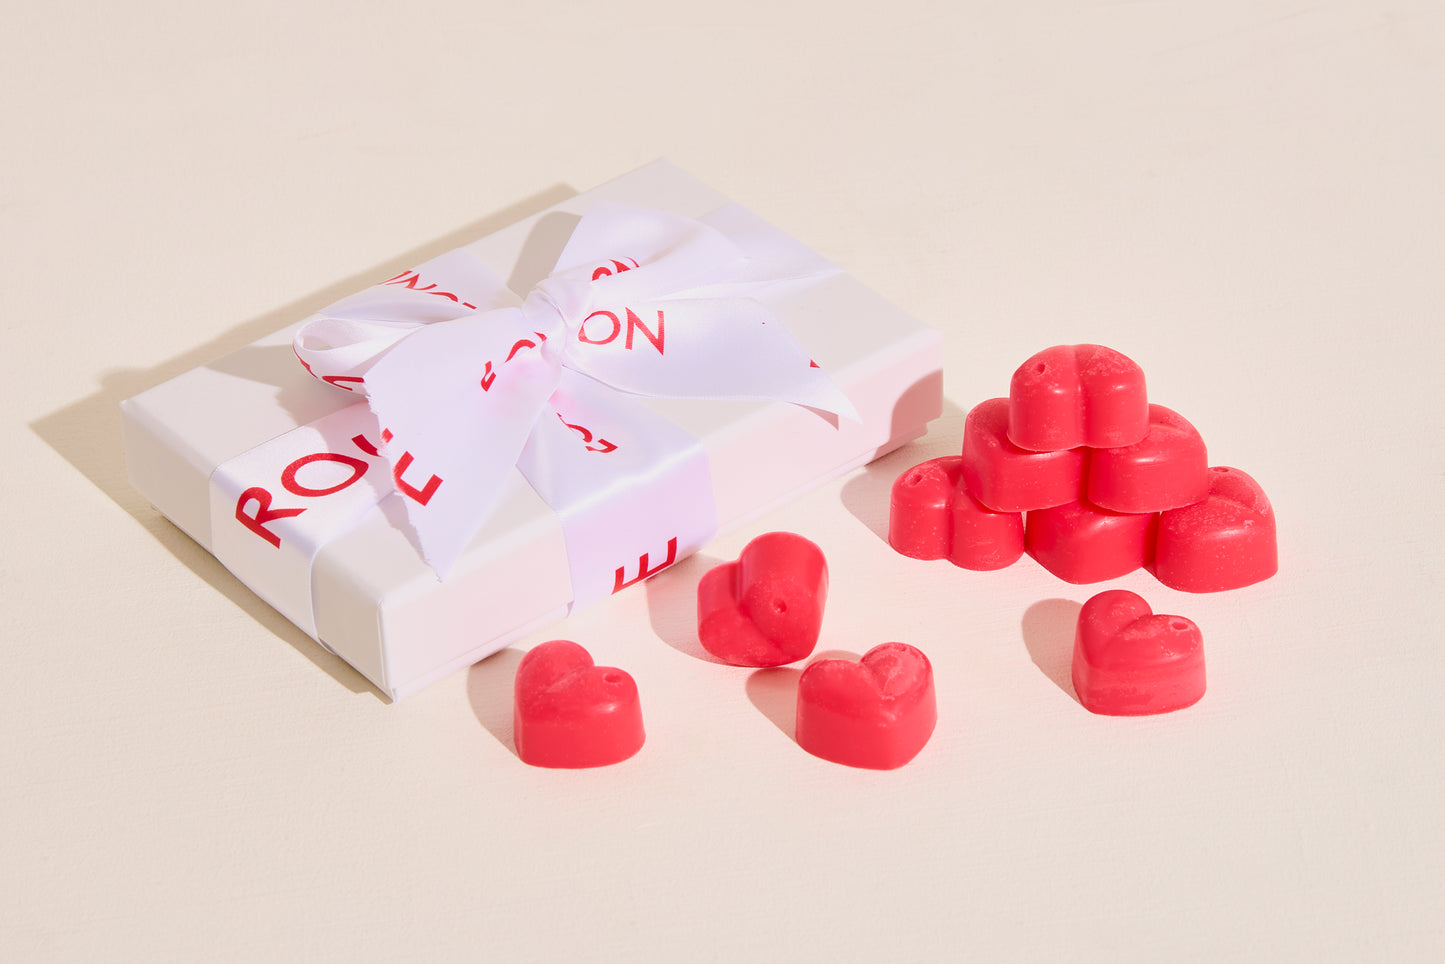 Cuddle - Peony & Iris Luxury Scented Wax Melts - By Rouge London